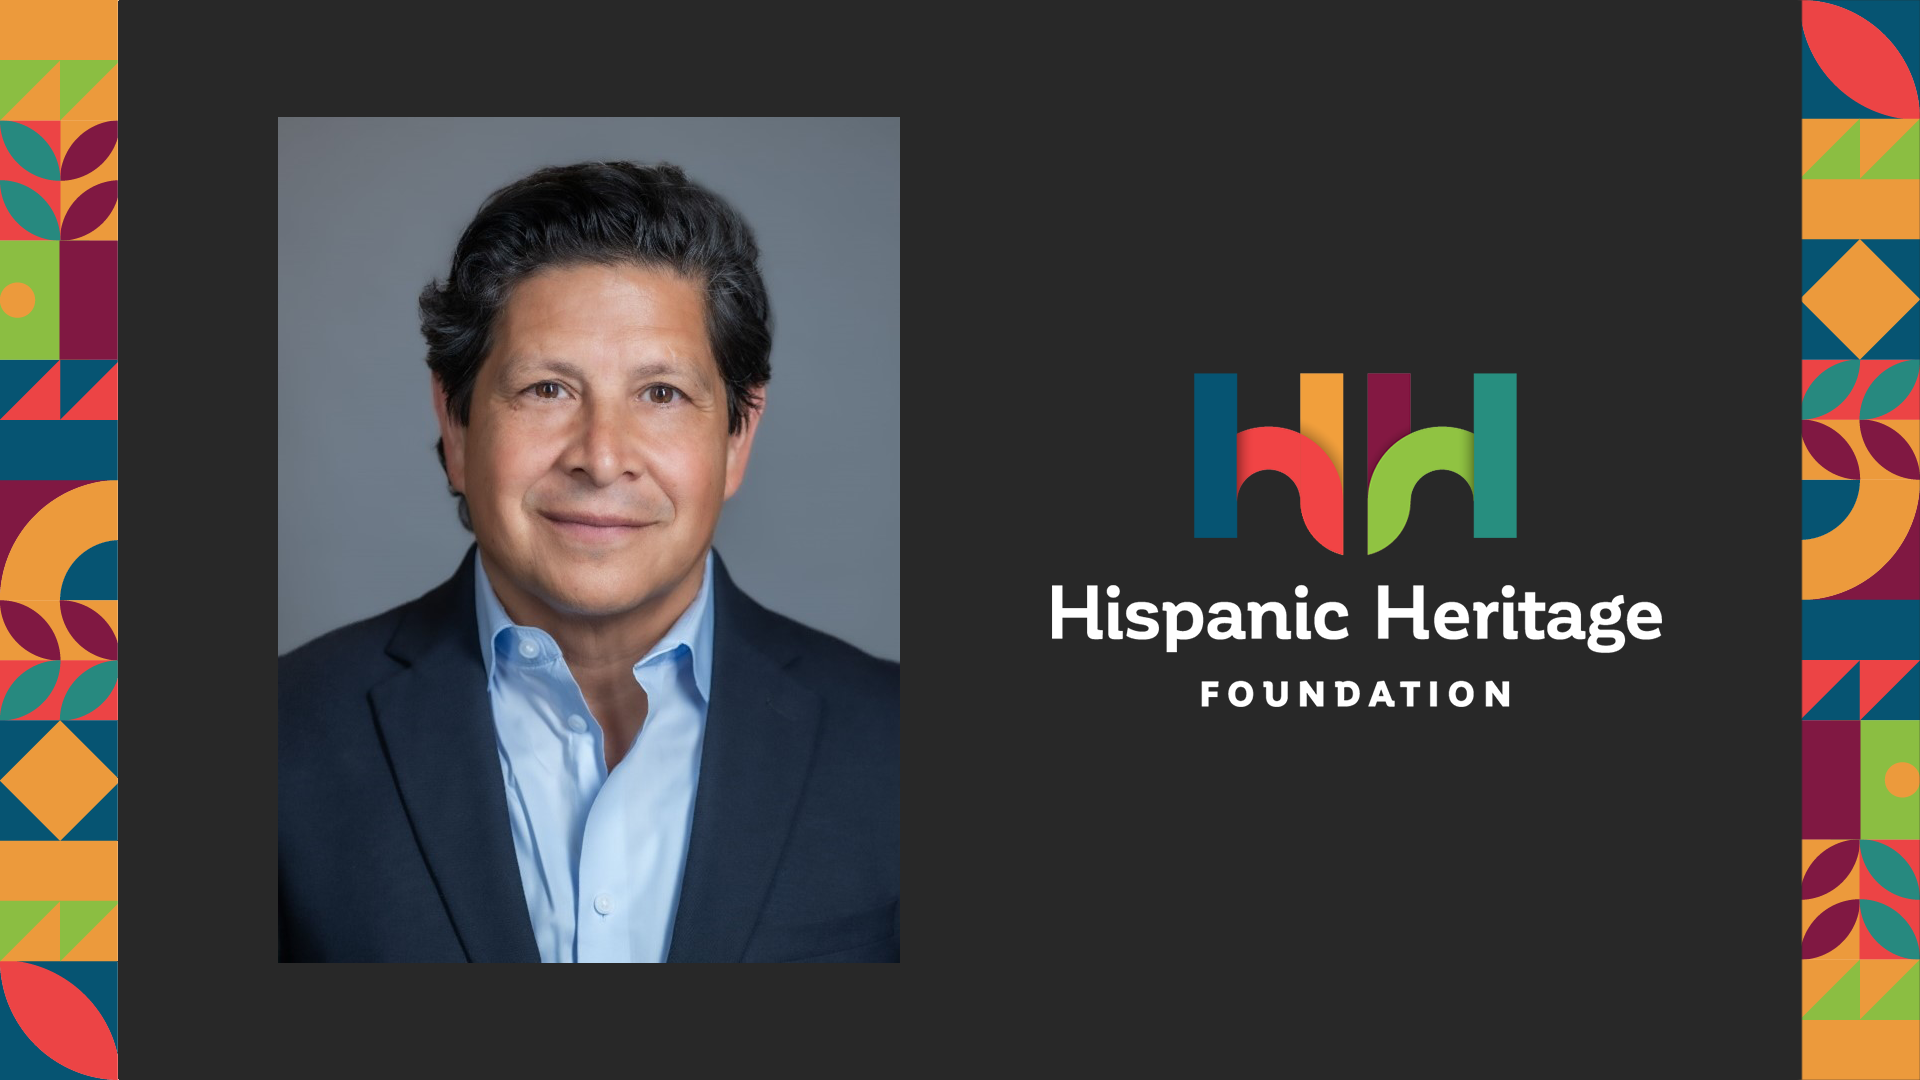 Hispanic Heritage Foundation’s Antonio Tijerino to Be Honored with SHPE Star Award for Impact on STEM Education and Career Paths